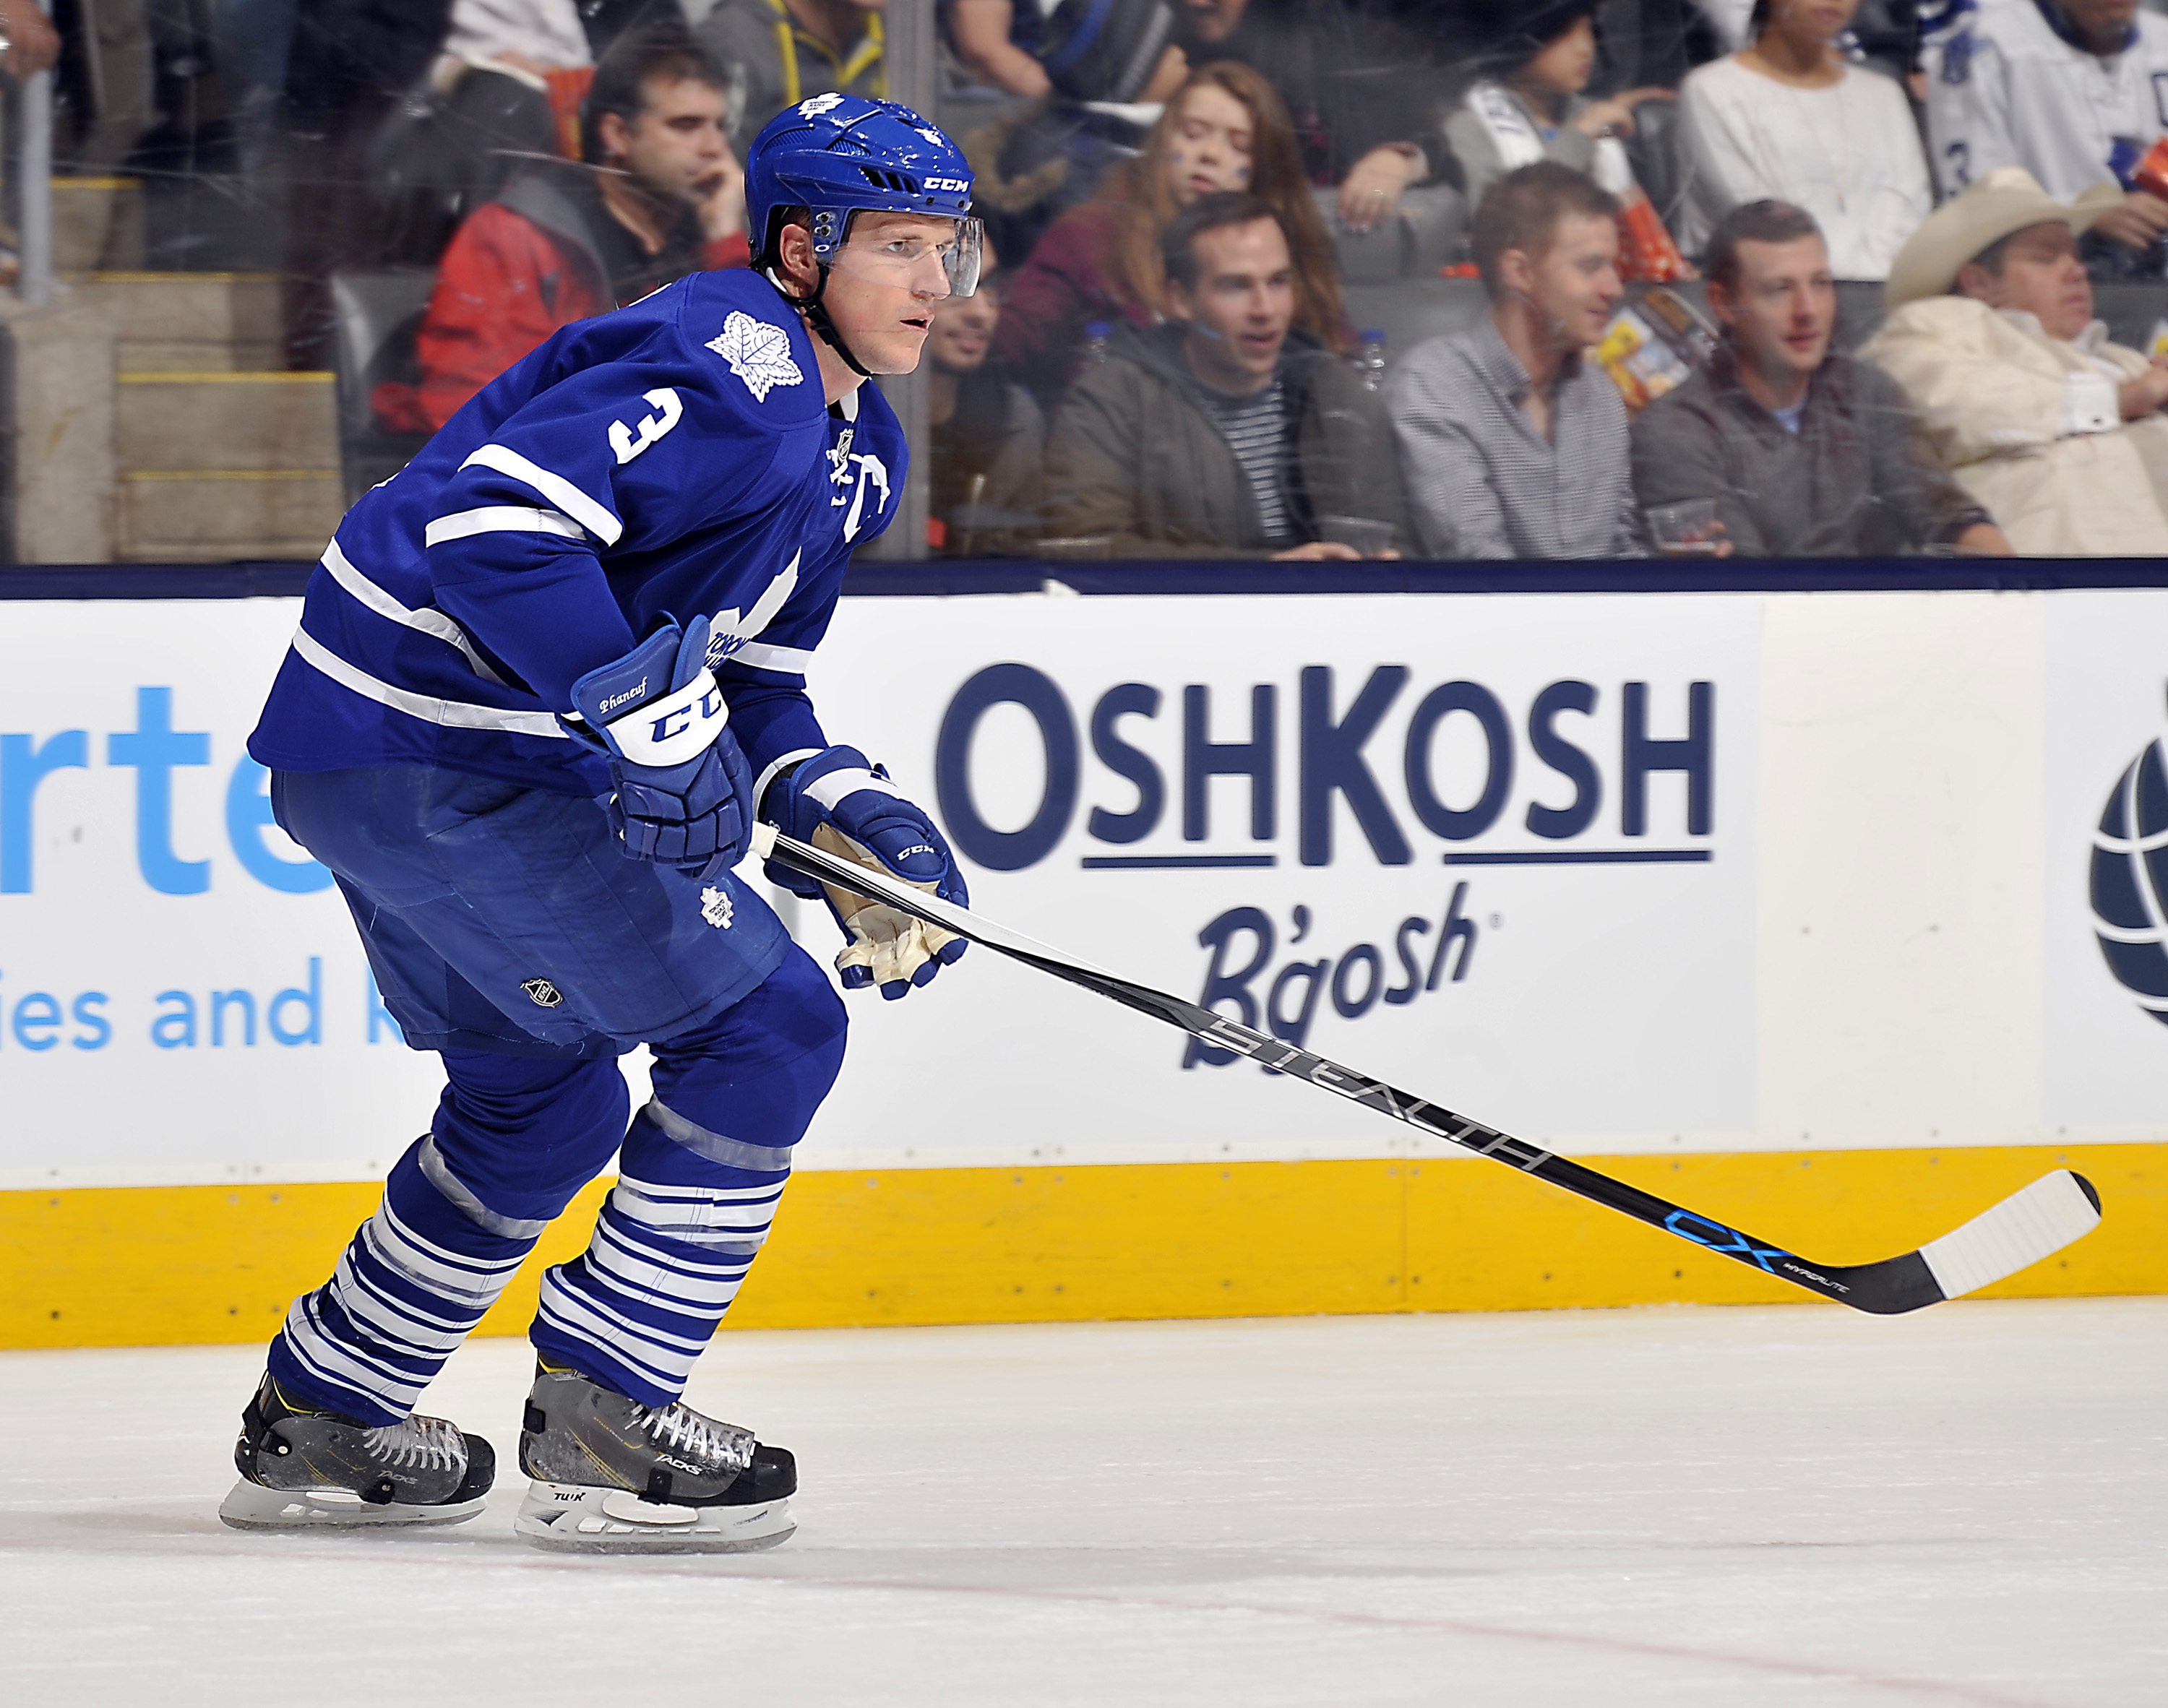 Five potential trade destinations for Dion Phaneuf